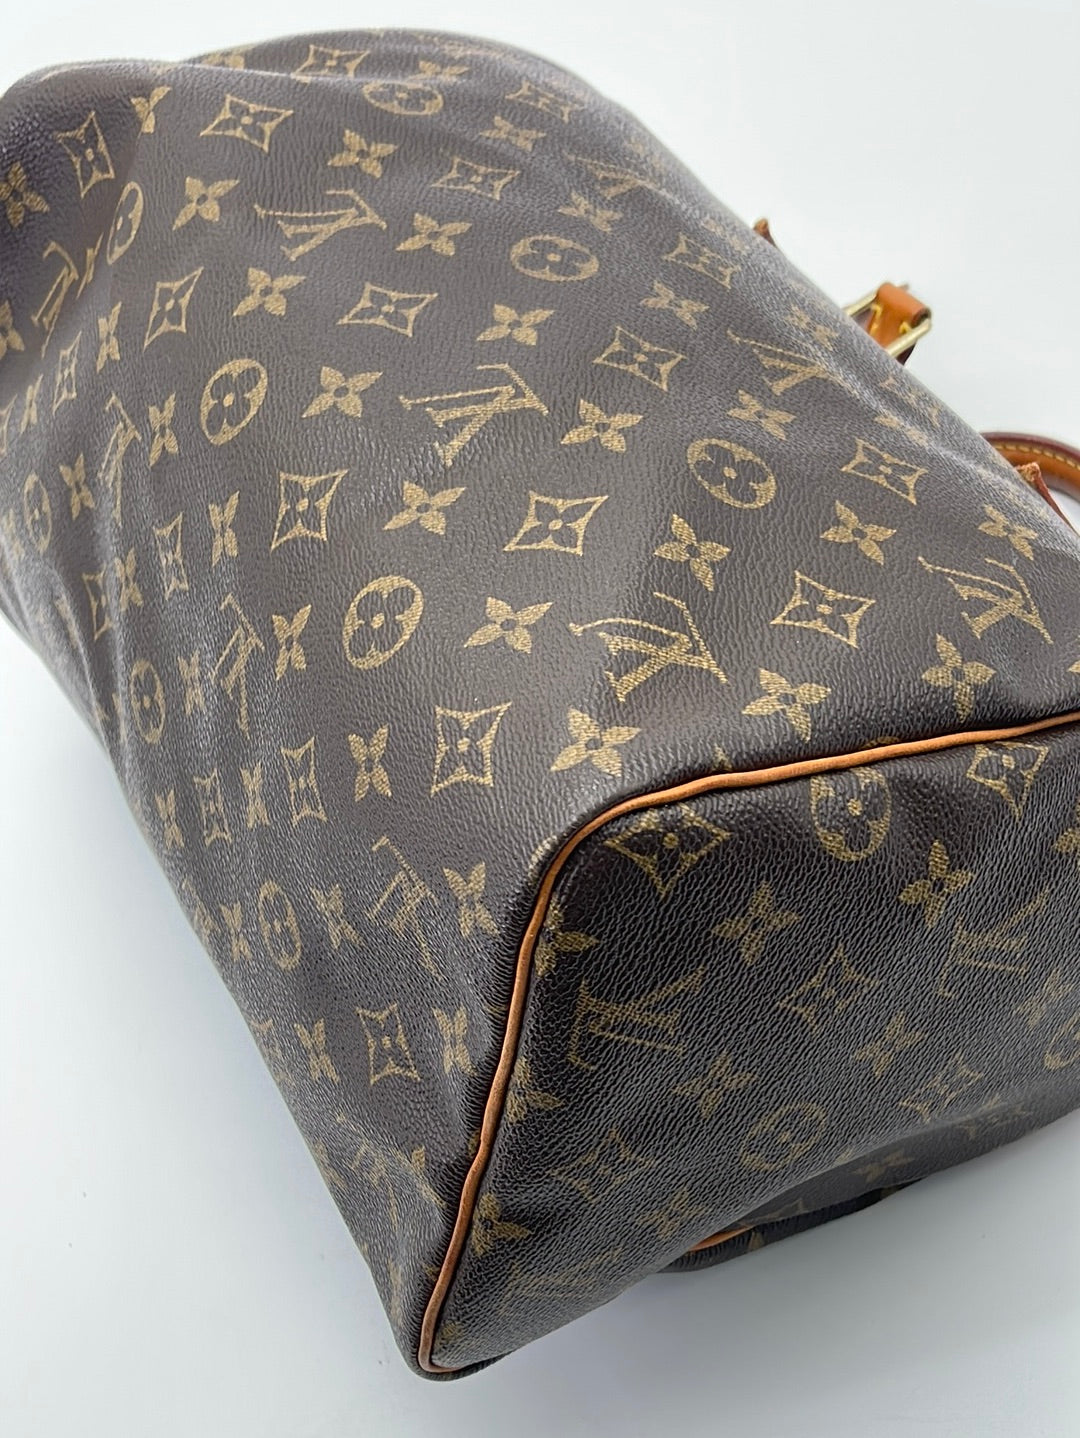 Most recent purchases! I got a 2007 speedy 25 DA preloved and a new MIF  zippy wallet in monogram and rose ballerine inside. The 25 is the perfect  top handle carry size. : r/Louisvuitton